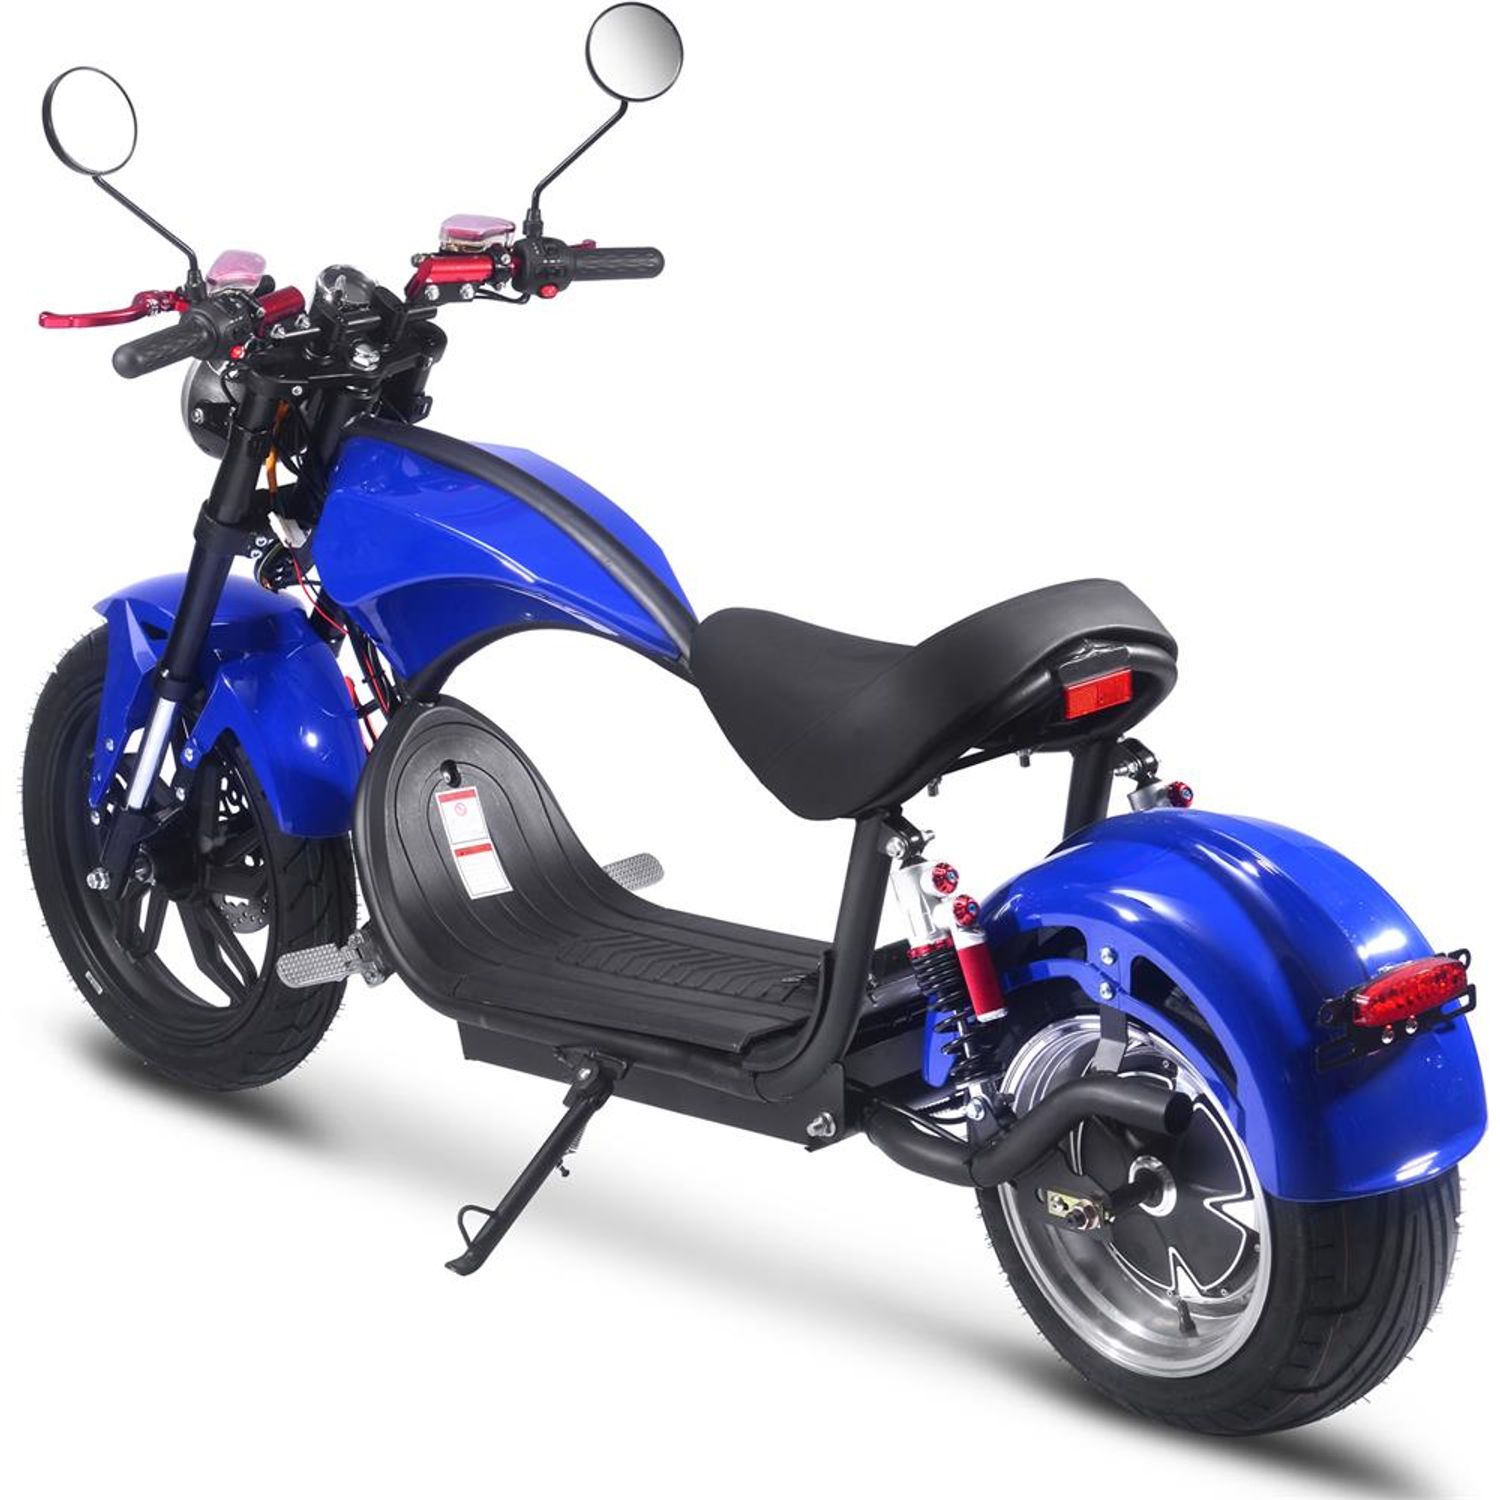 SAY YEAH M4 Blue Electric Motorcycle 2500W 60V Top Speed 28mph Range Per Charge: 35 to 50 miles